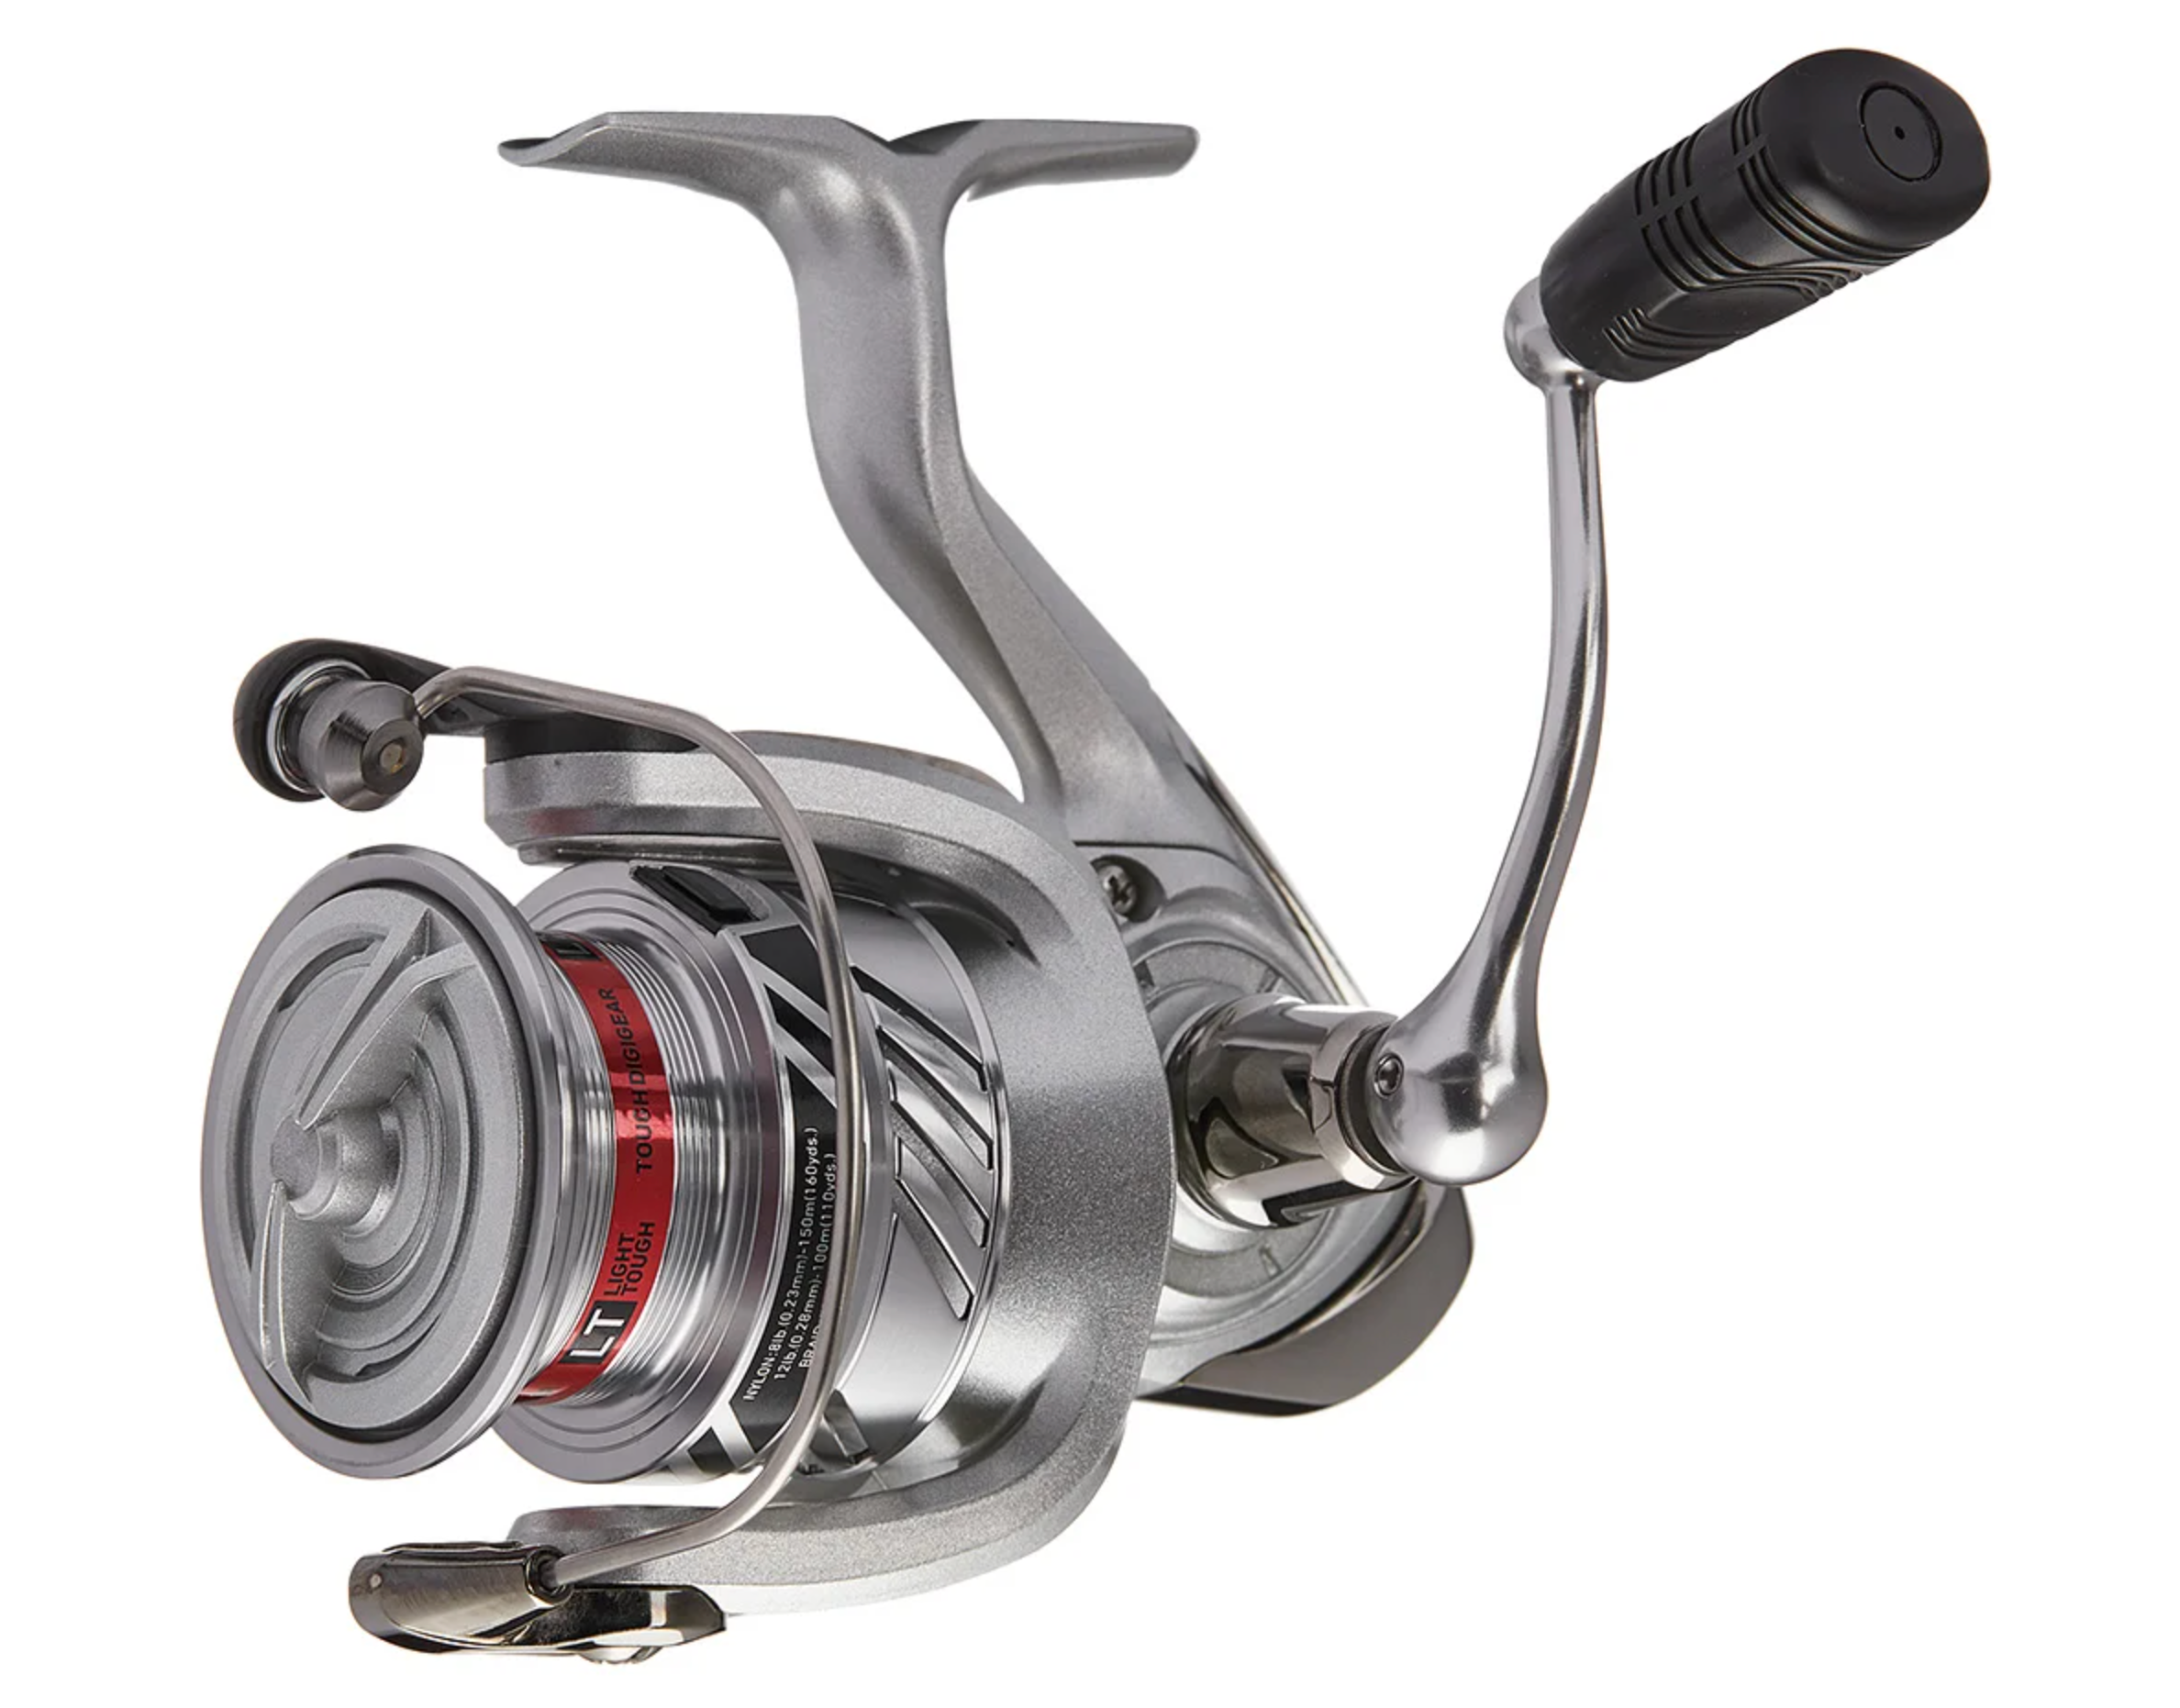 Spinning Fishing Reels No Gap Saltwater FishingReel Coil Tatula Spinning  Reel With Free Metal Spare Spool From Yala_products, $50.26